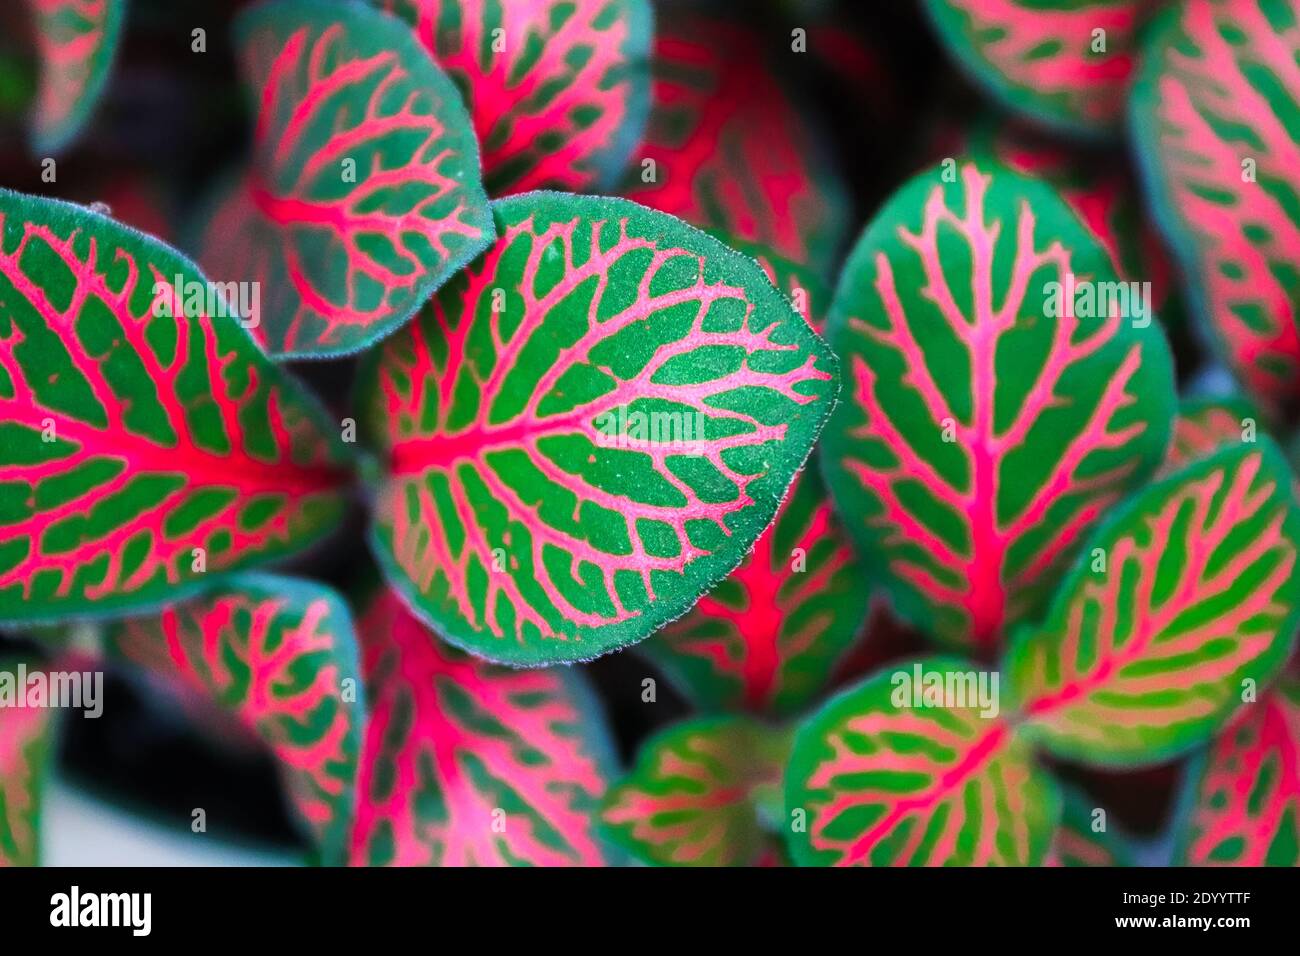 Closeup of pink veins on a fittonia houseplant. Stock Photo